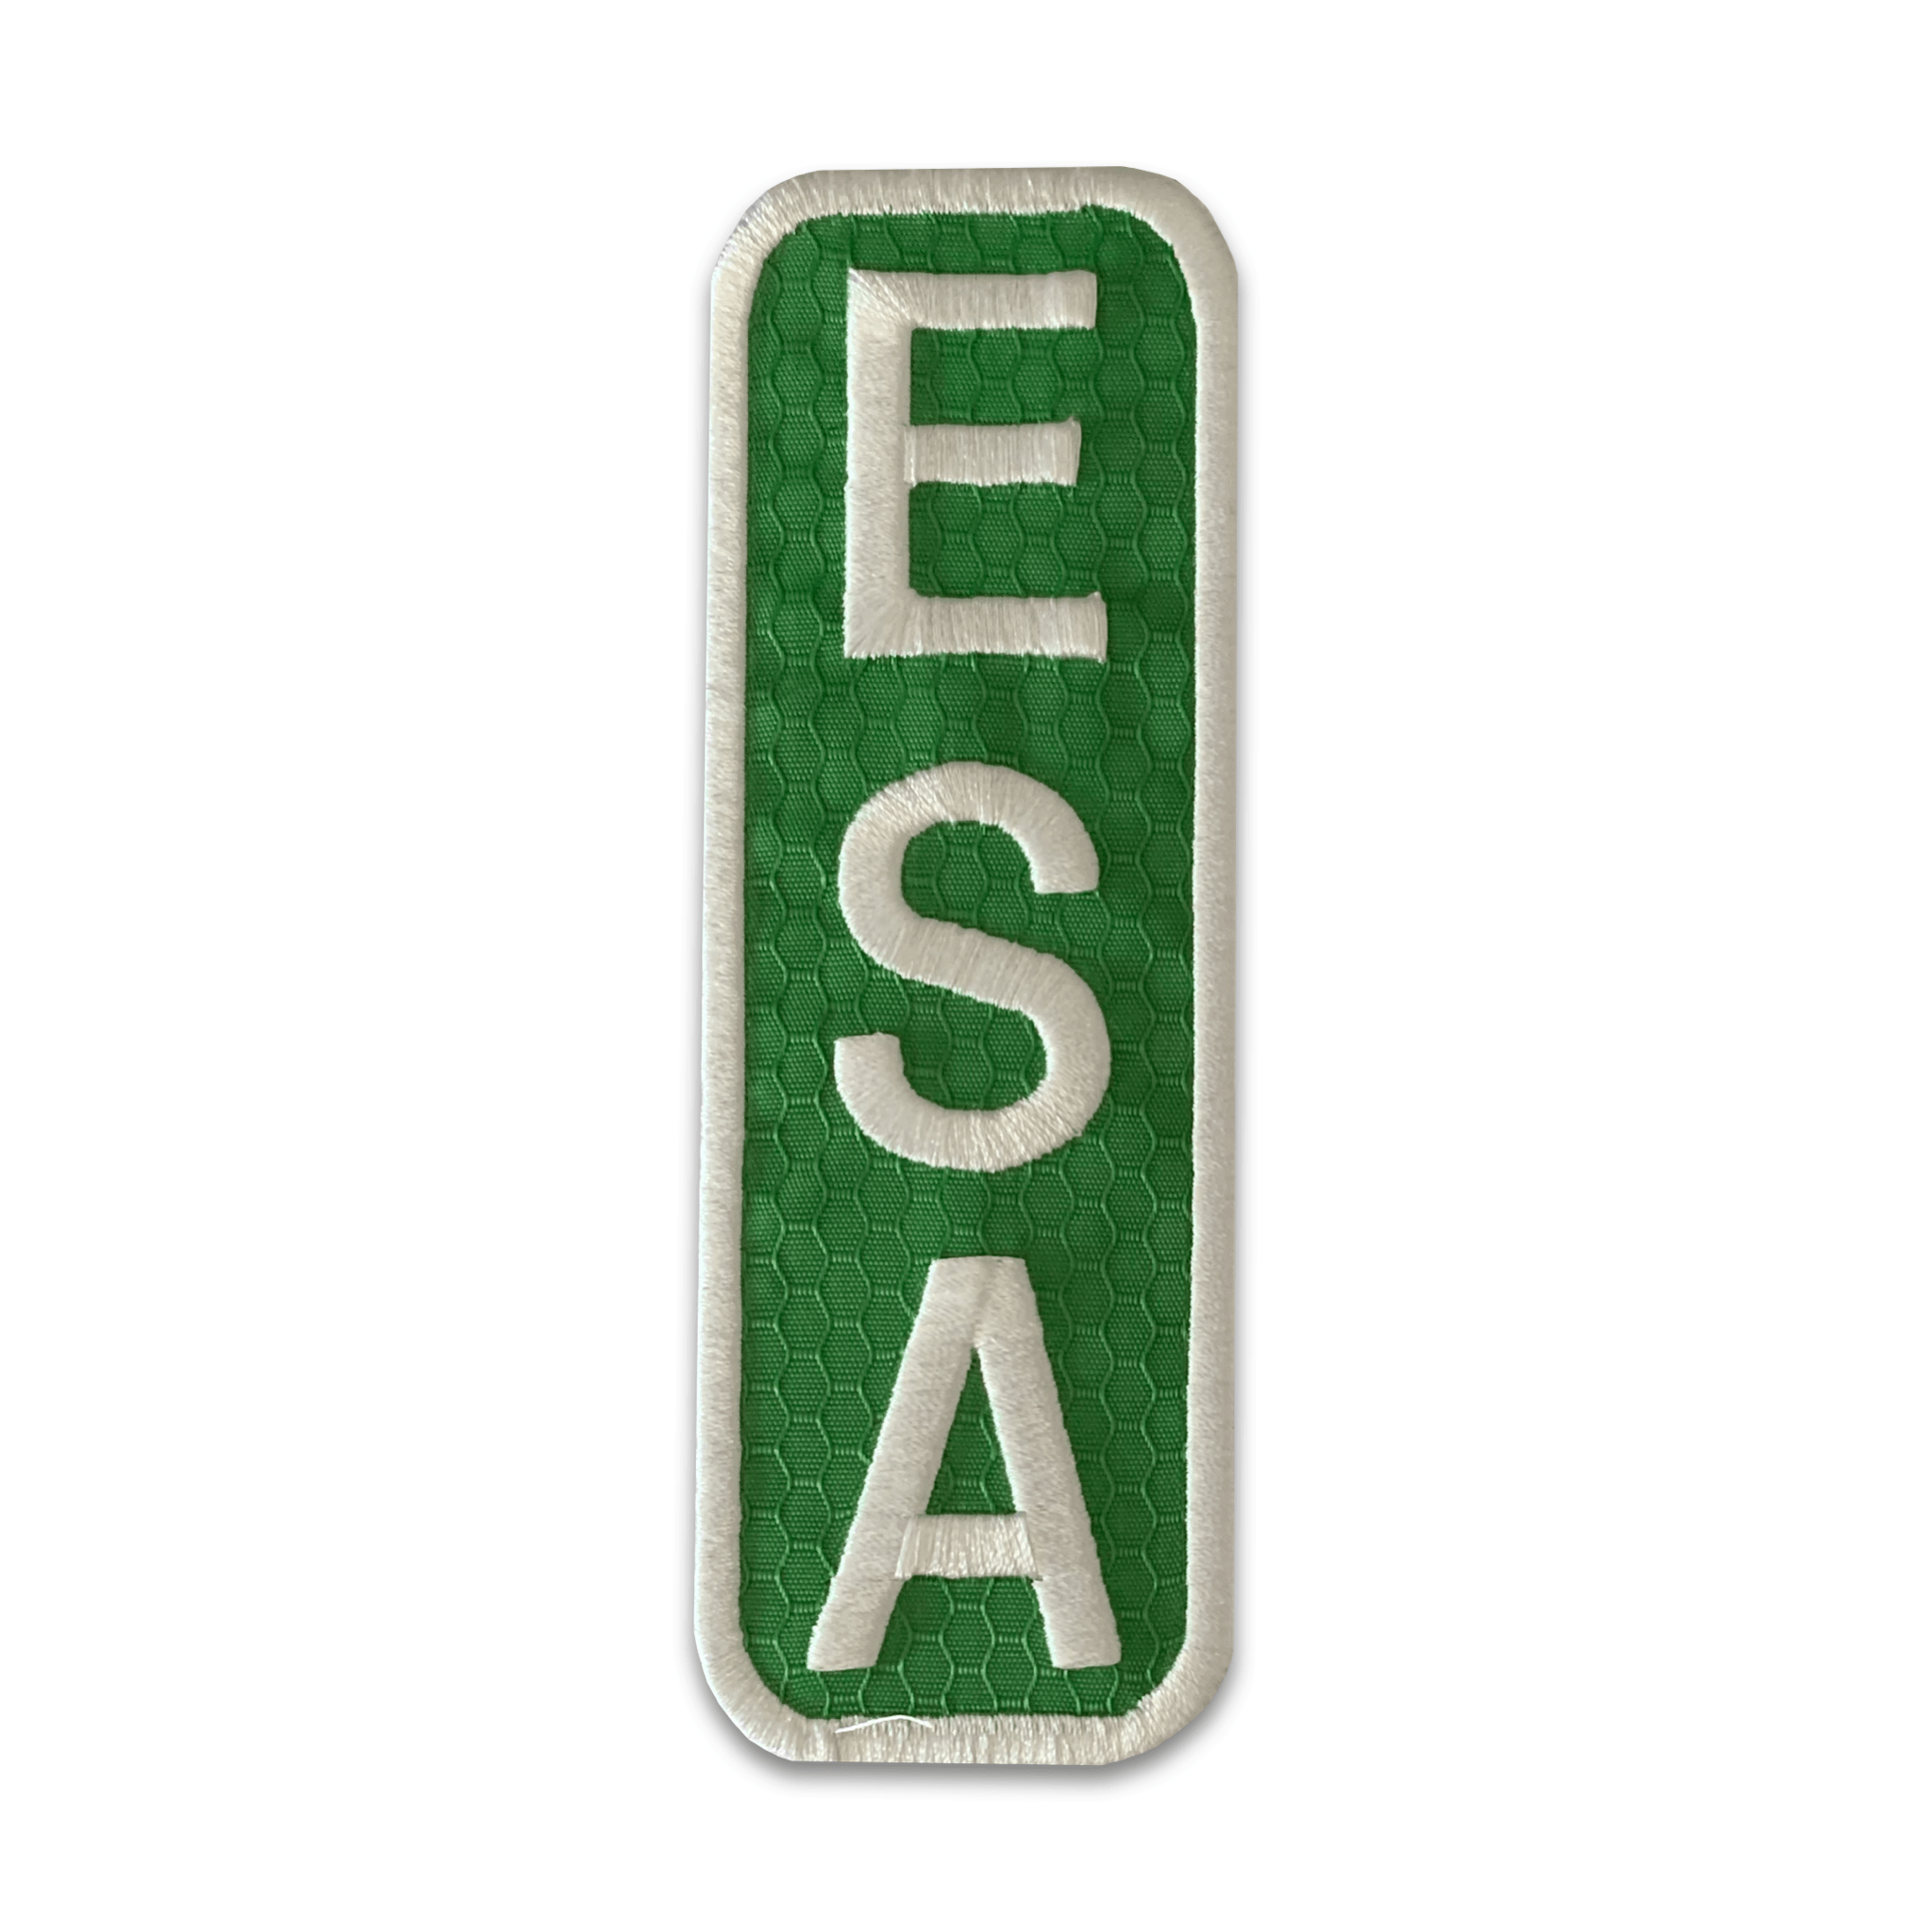 ESA Green Service dog patches